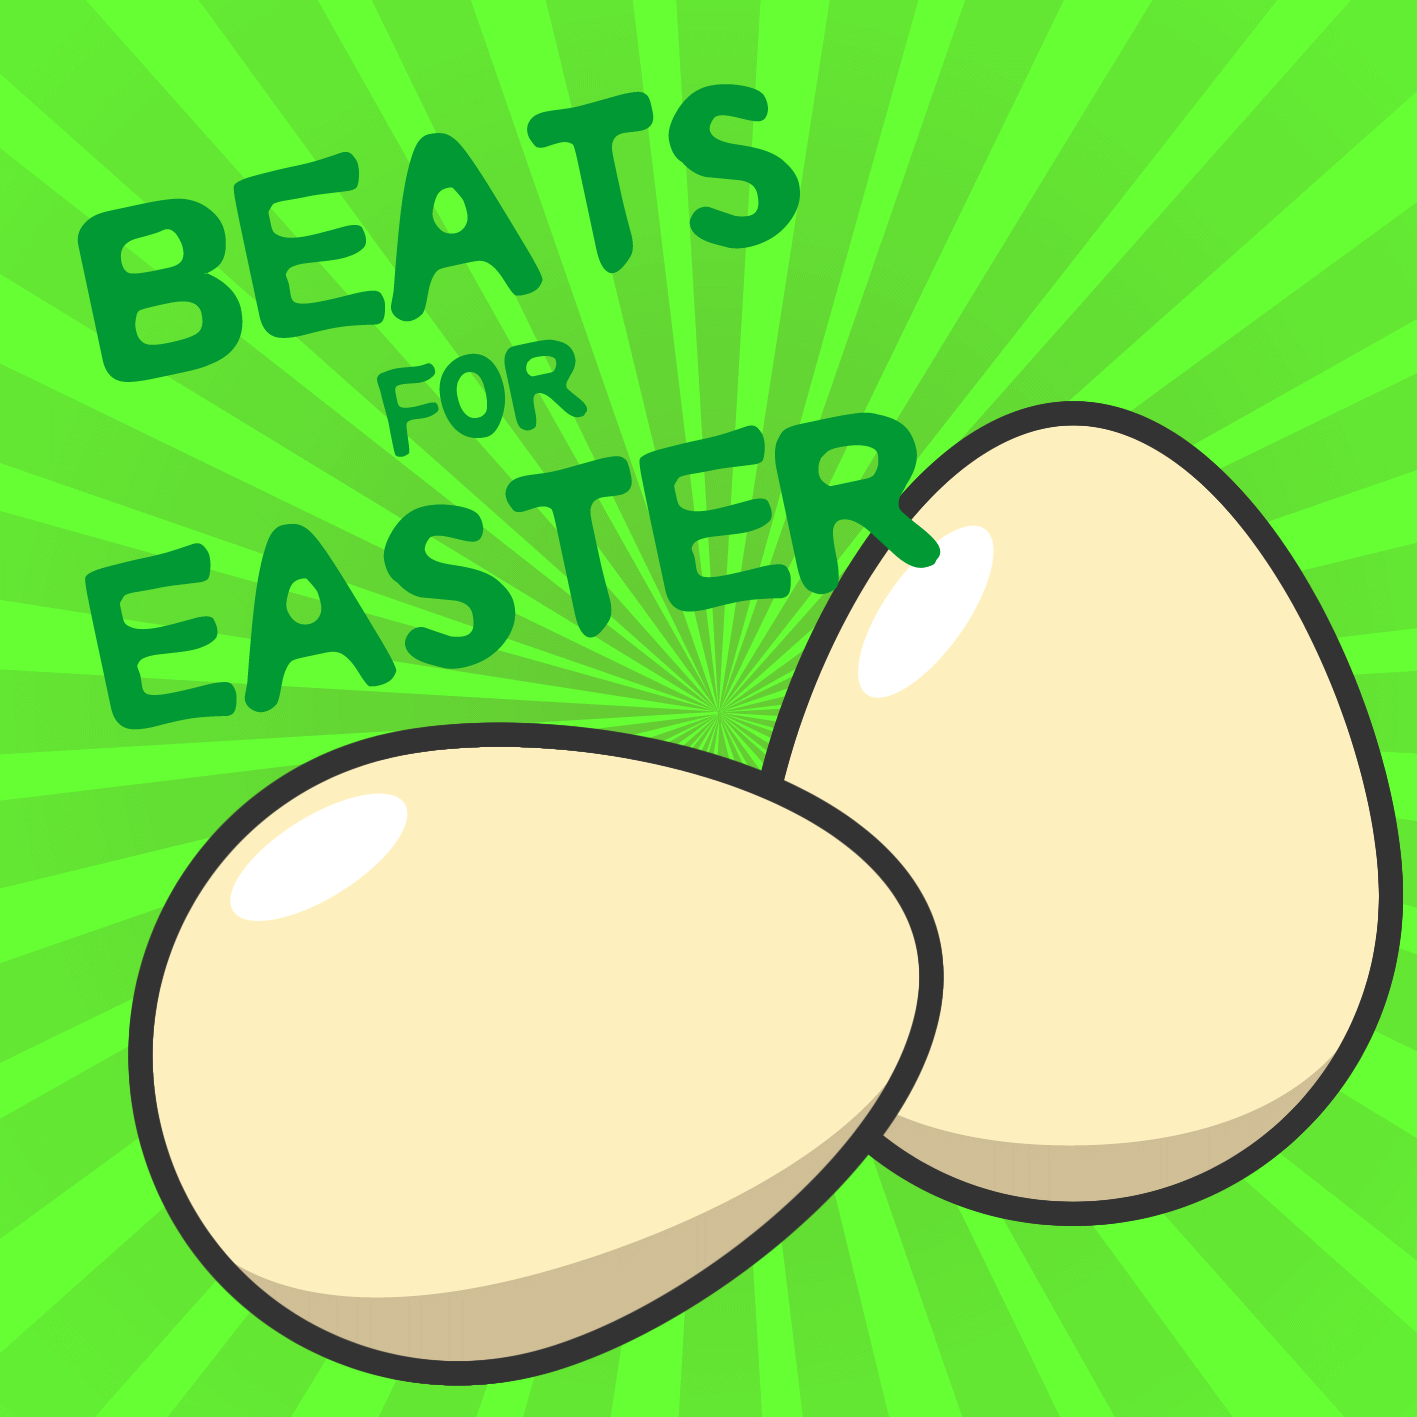 #FinesseFriday - Beats For Easter